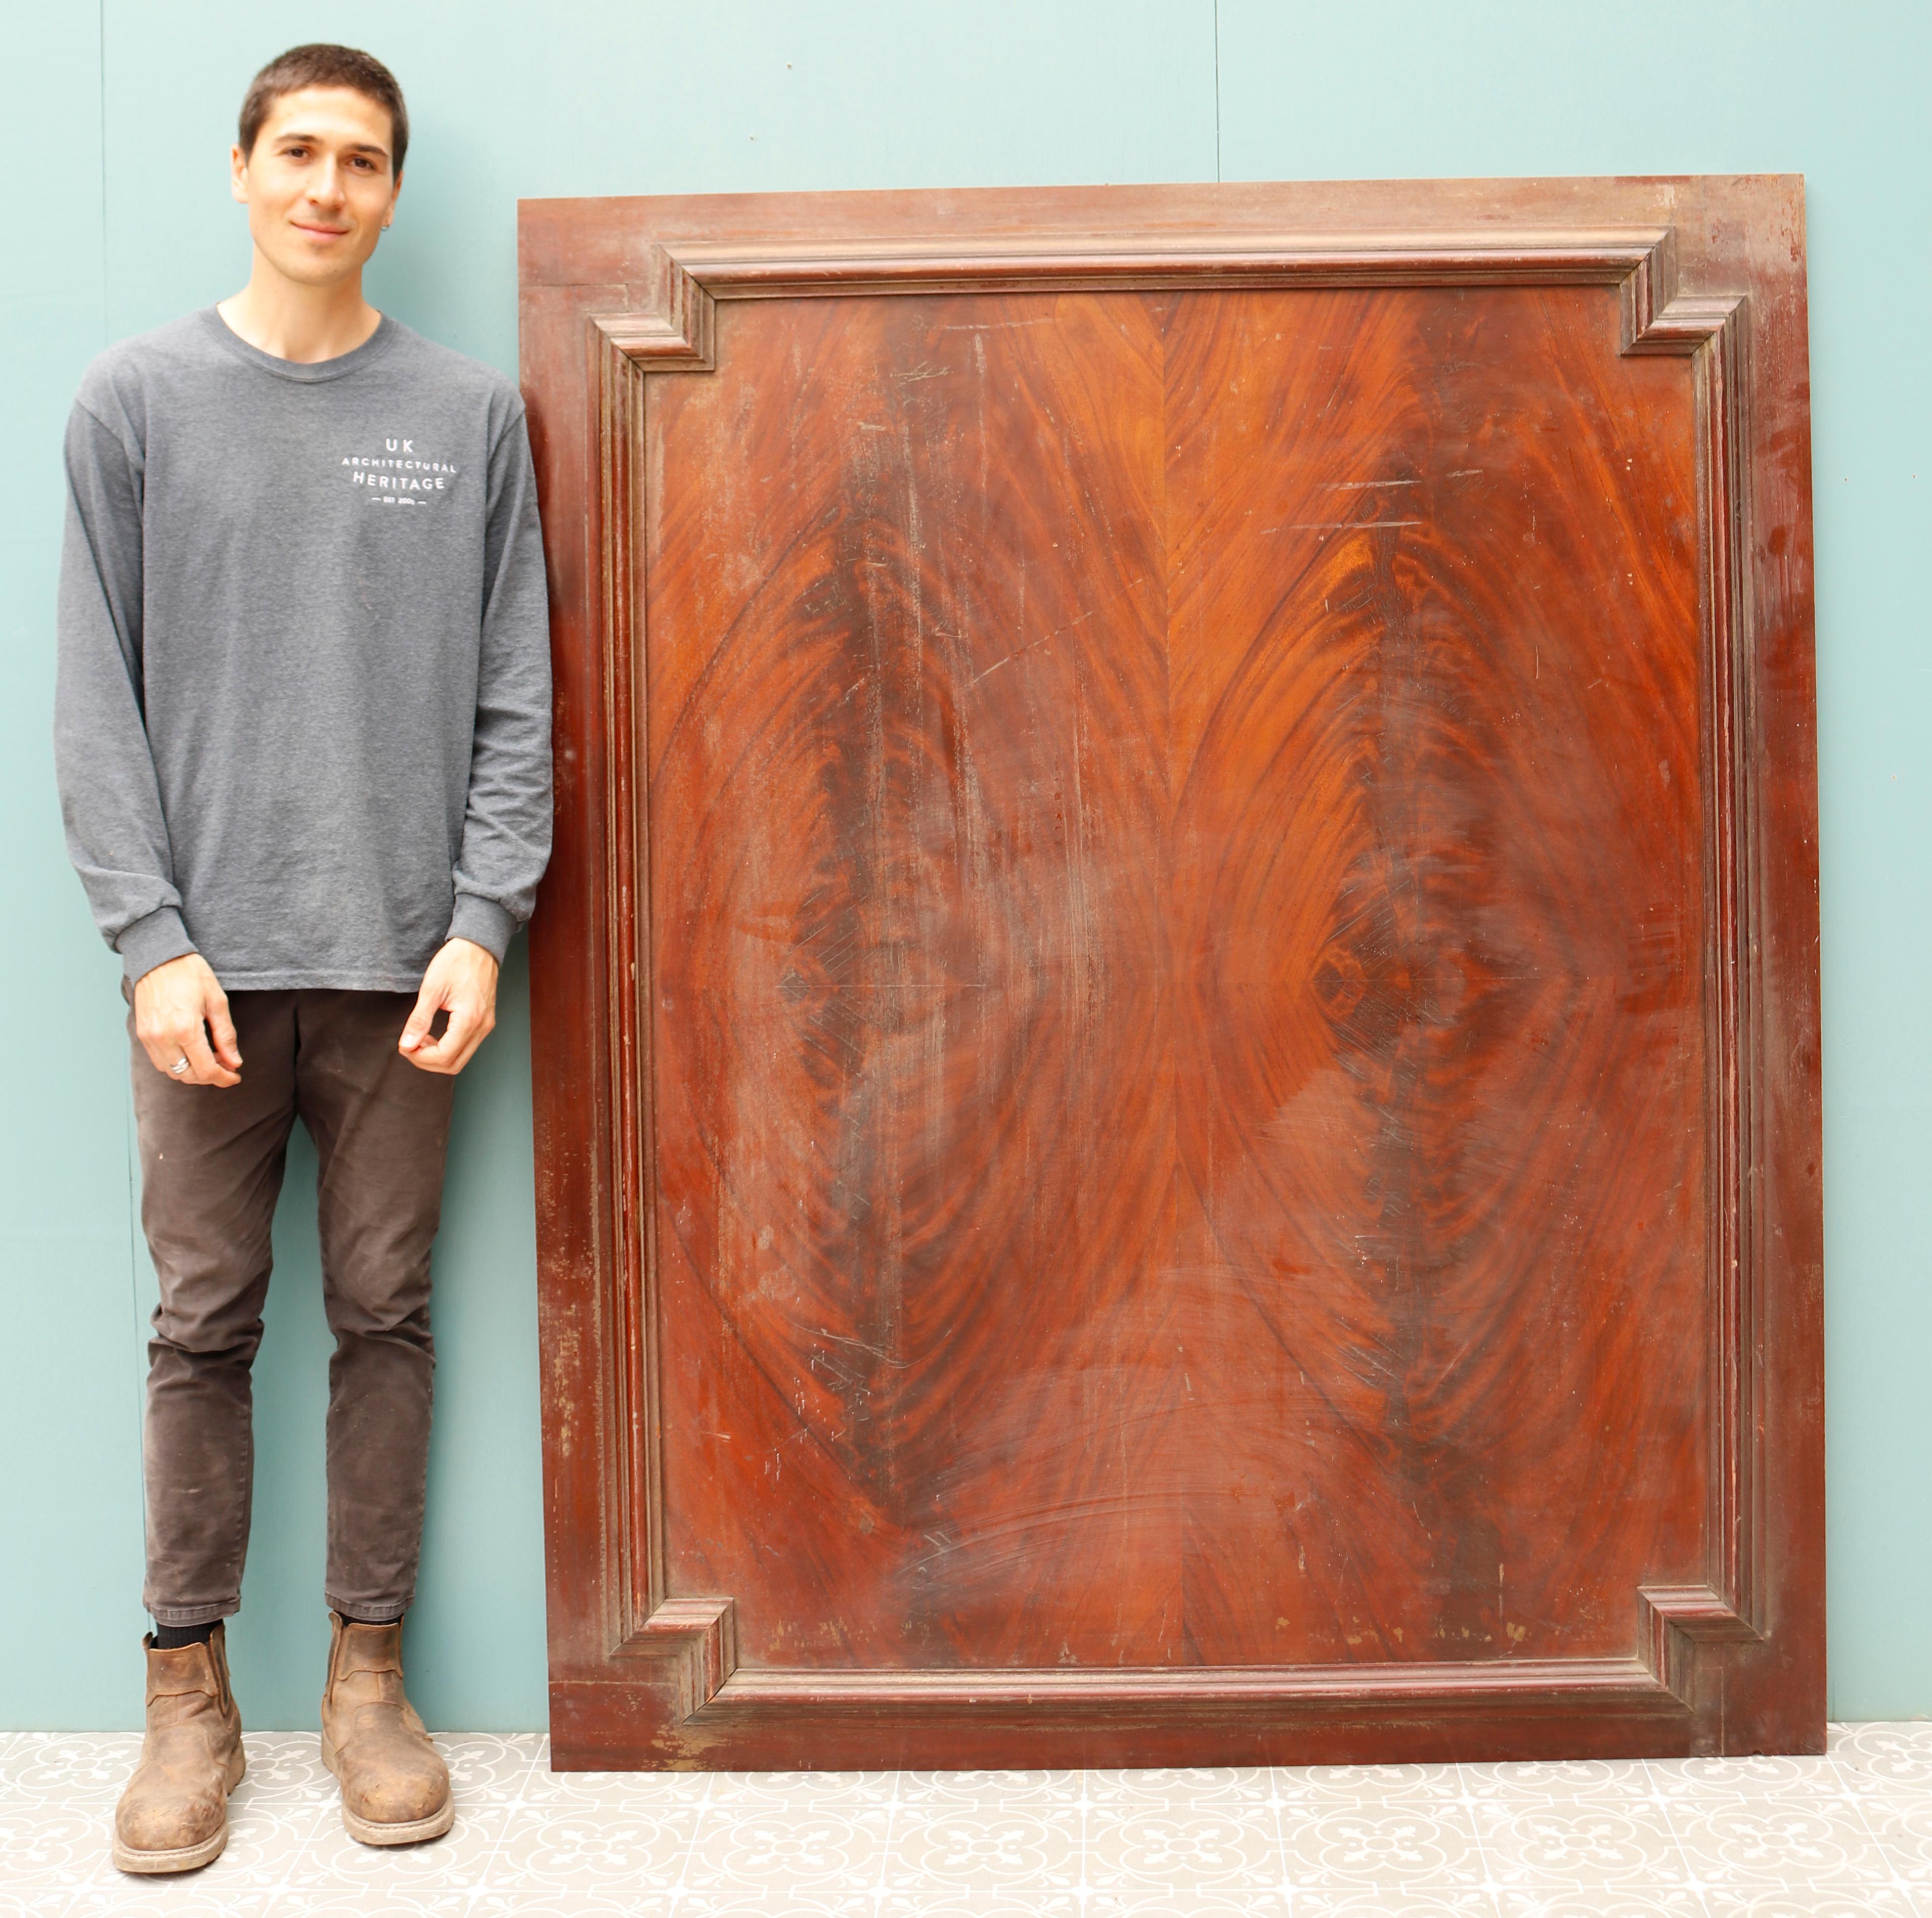 Reclaimed Mahogany wall panel. The panel comes with book matched veneer panels. This would make a wonderful head board, even a grand menu or notice board with such a vibrant colour and bold structure.